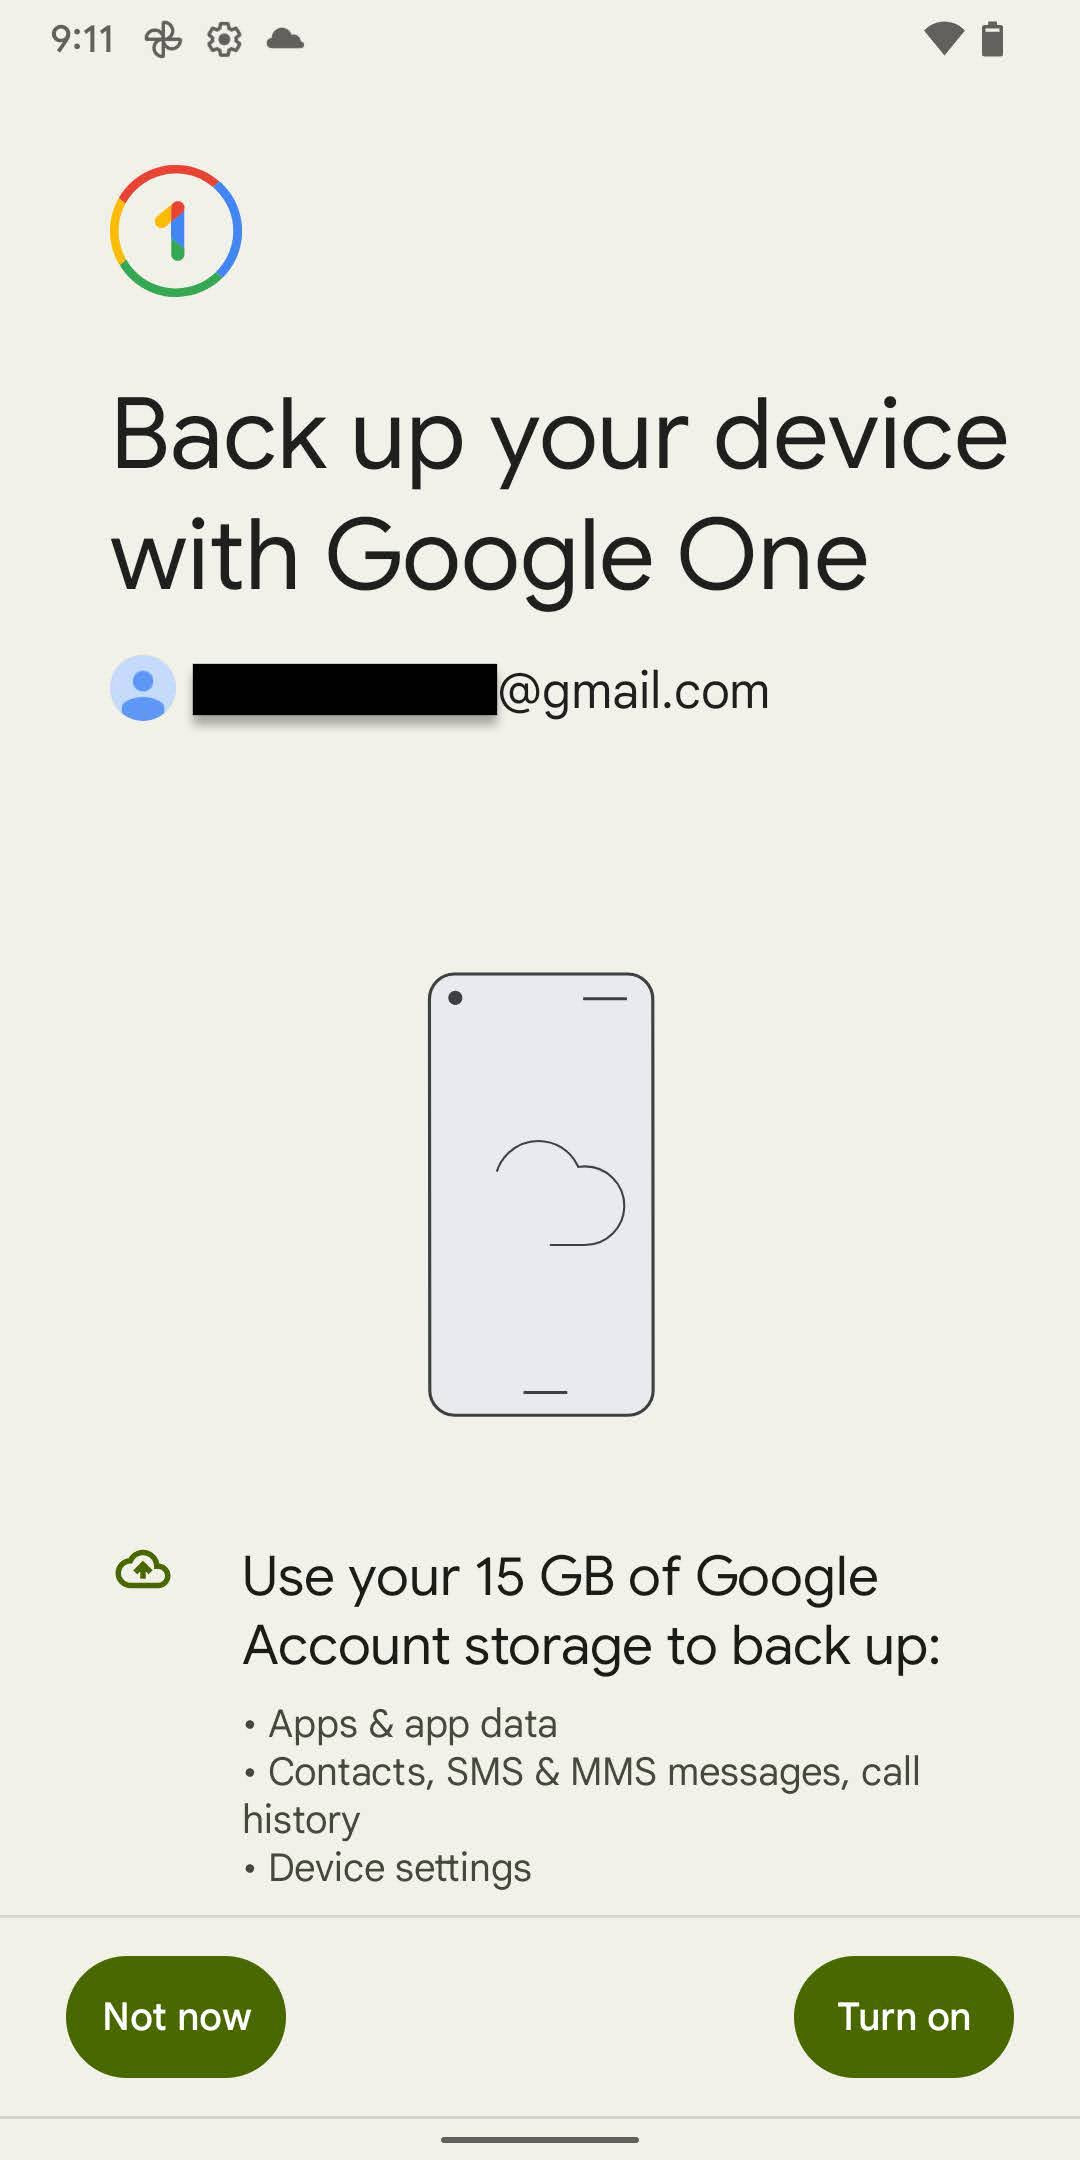 How to Transfer Data from an Old Android Phone to a New Android Phone